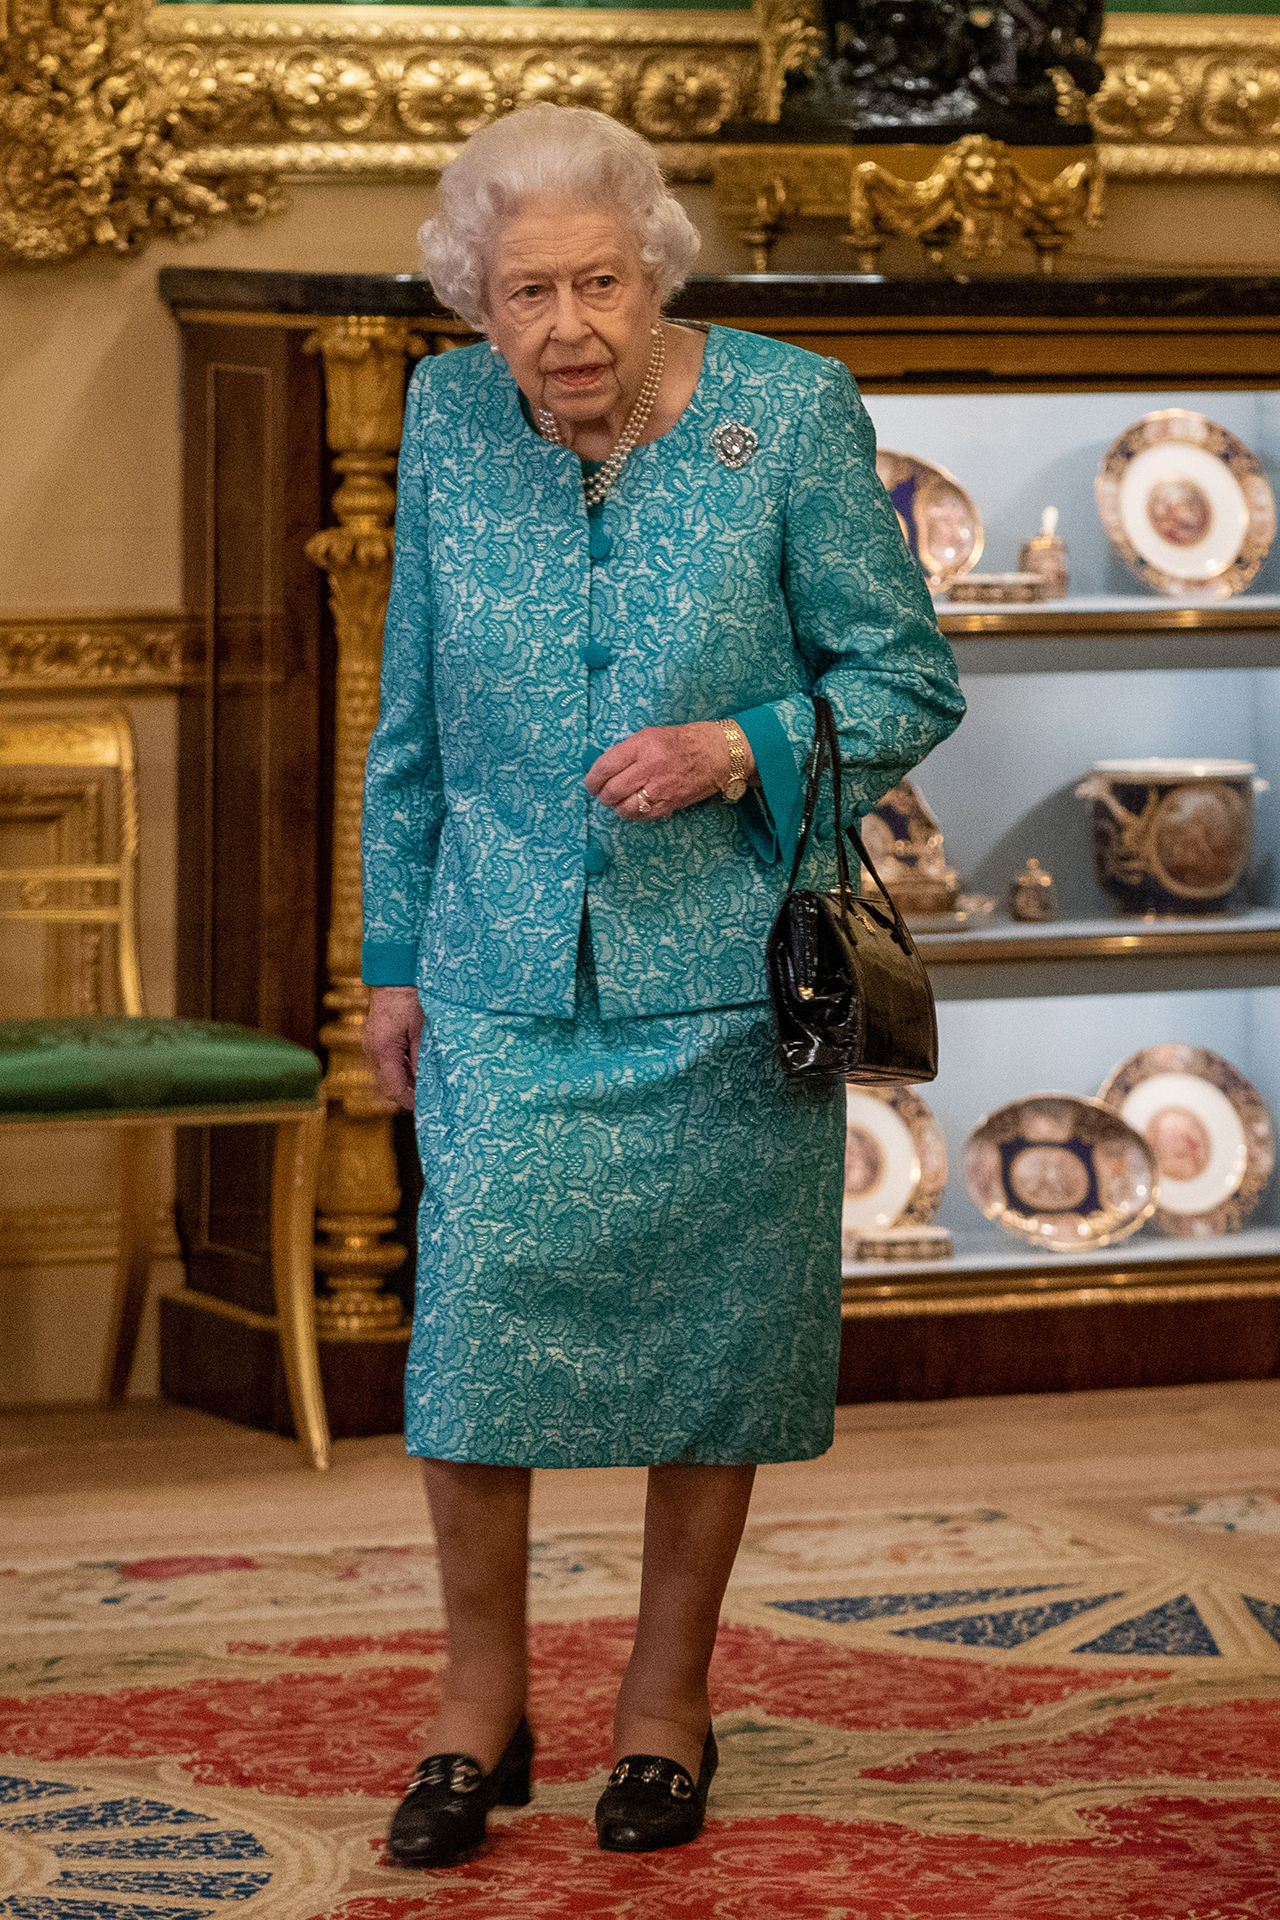 Queen Elizabeth II attends a reception to mark the Global Investment Summit, at Windsor Castle in Windsor, west of London on October 19, 2021. (Photo: Arthur Edwards / AFP via Getty Images)